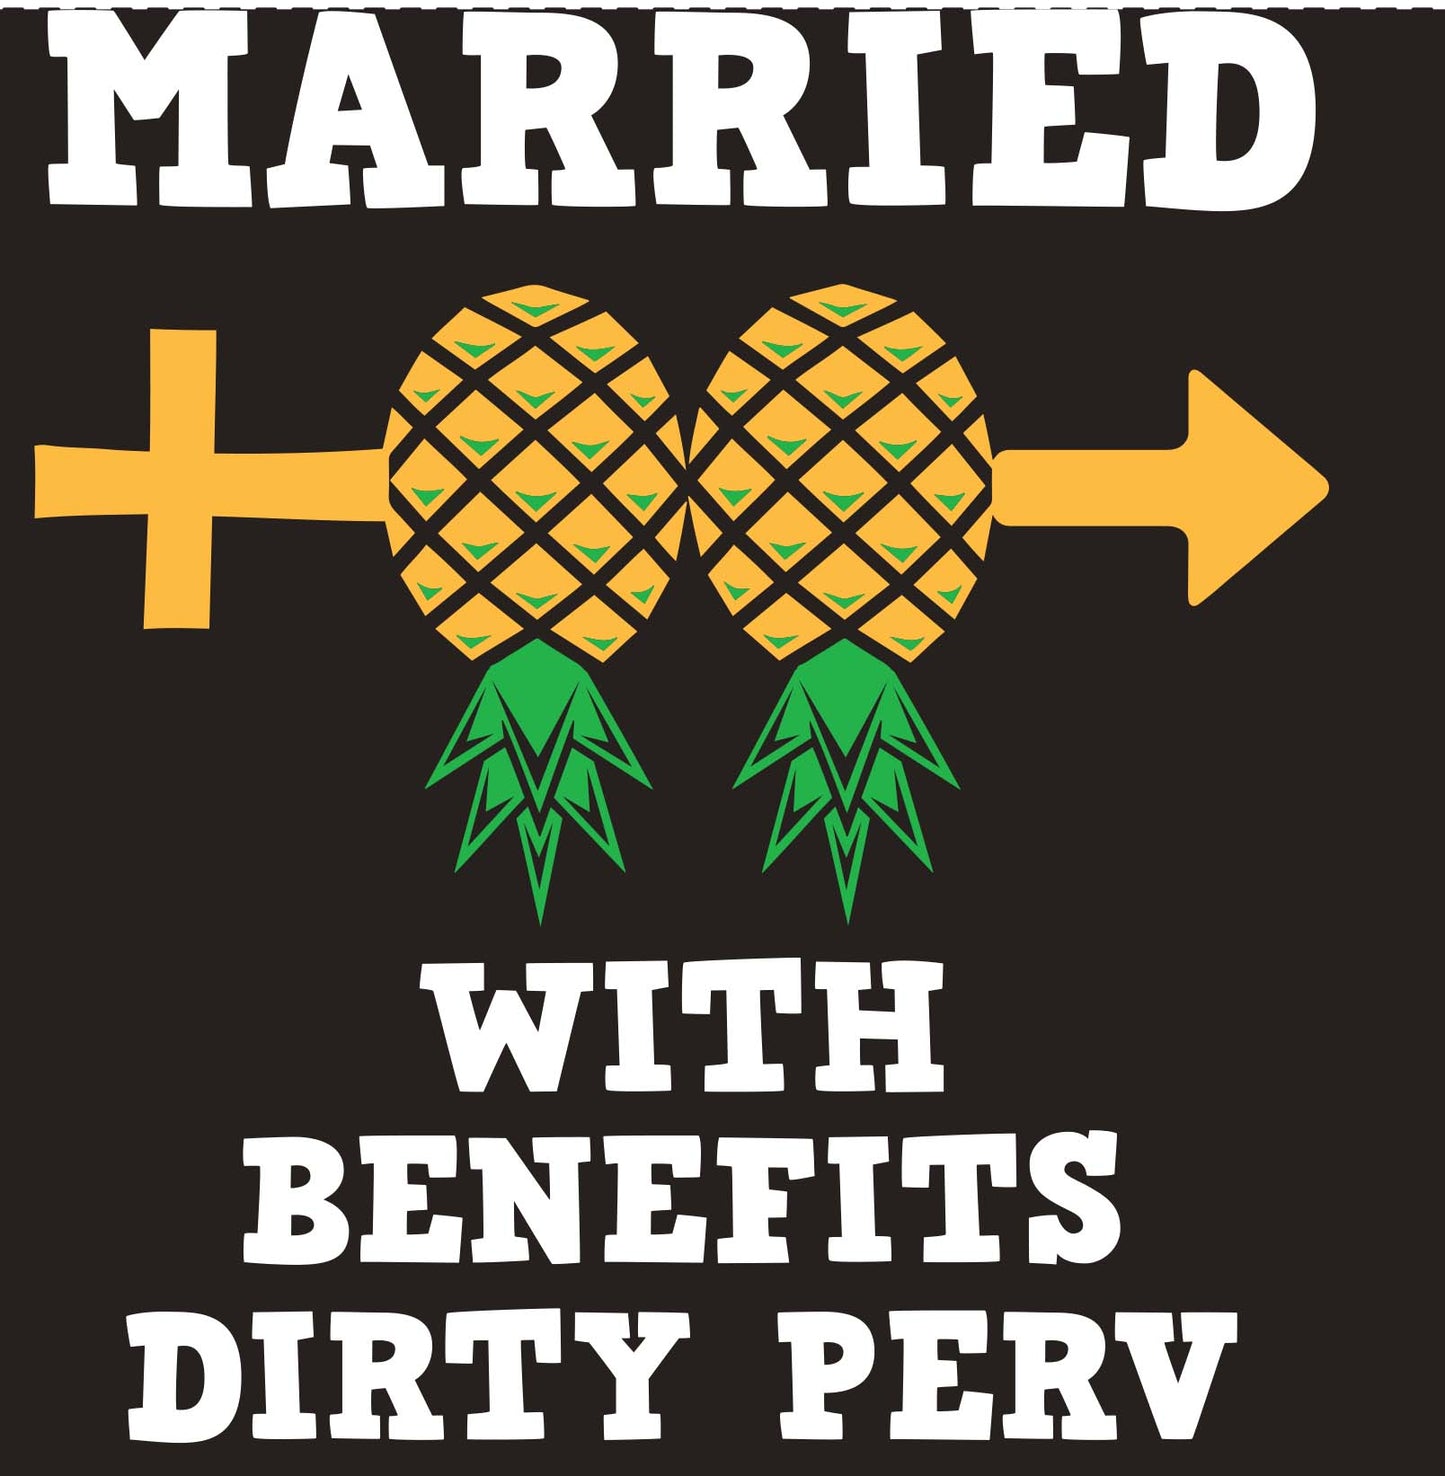 WOMENS TANK - MARRIED WITH BENEFITs